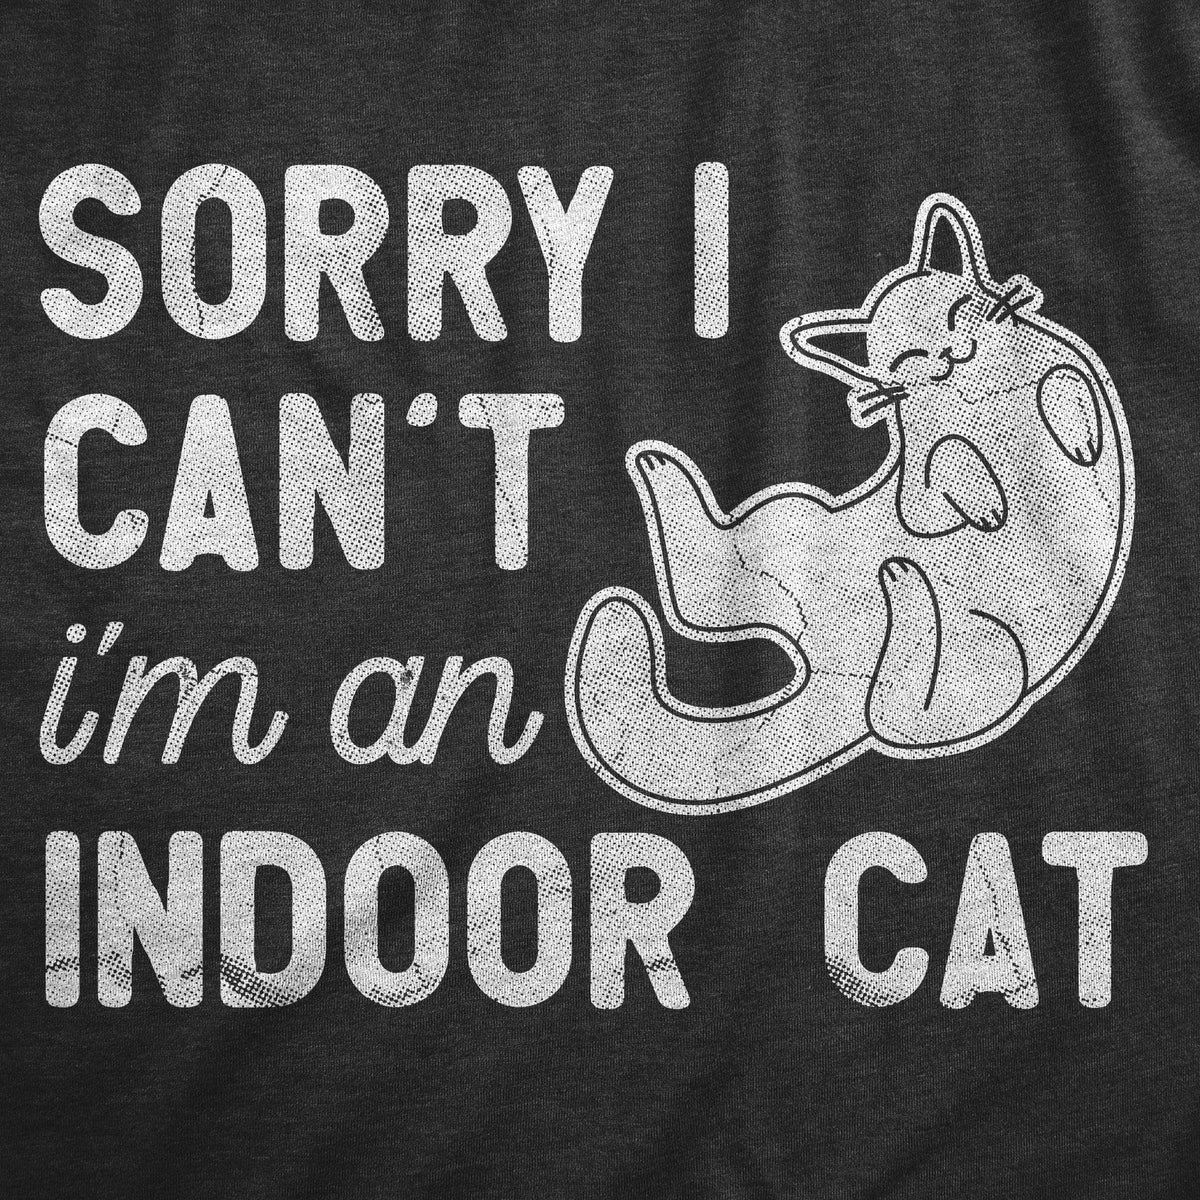 Sorry I Cant Im An Indoor Cat Women&#39;s Tshirt  -  Crazy Dog T-Shirts